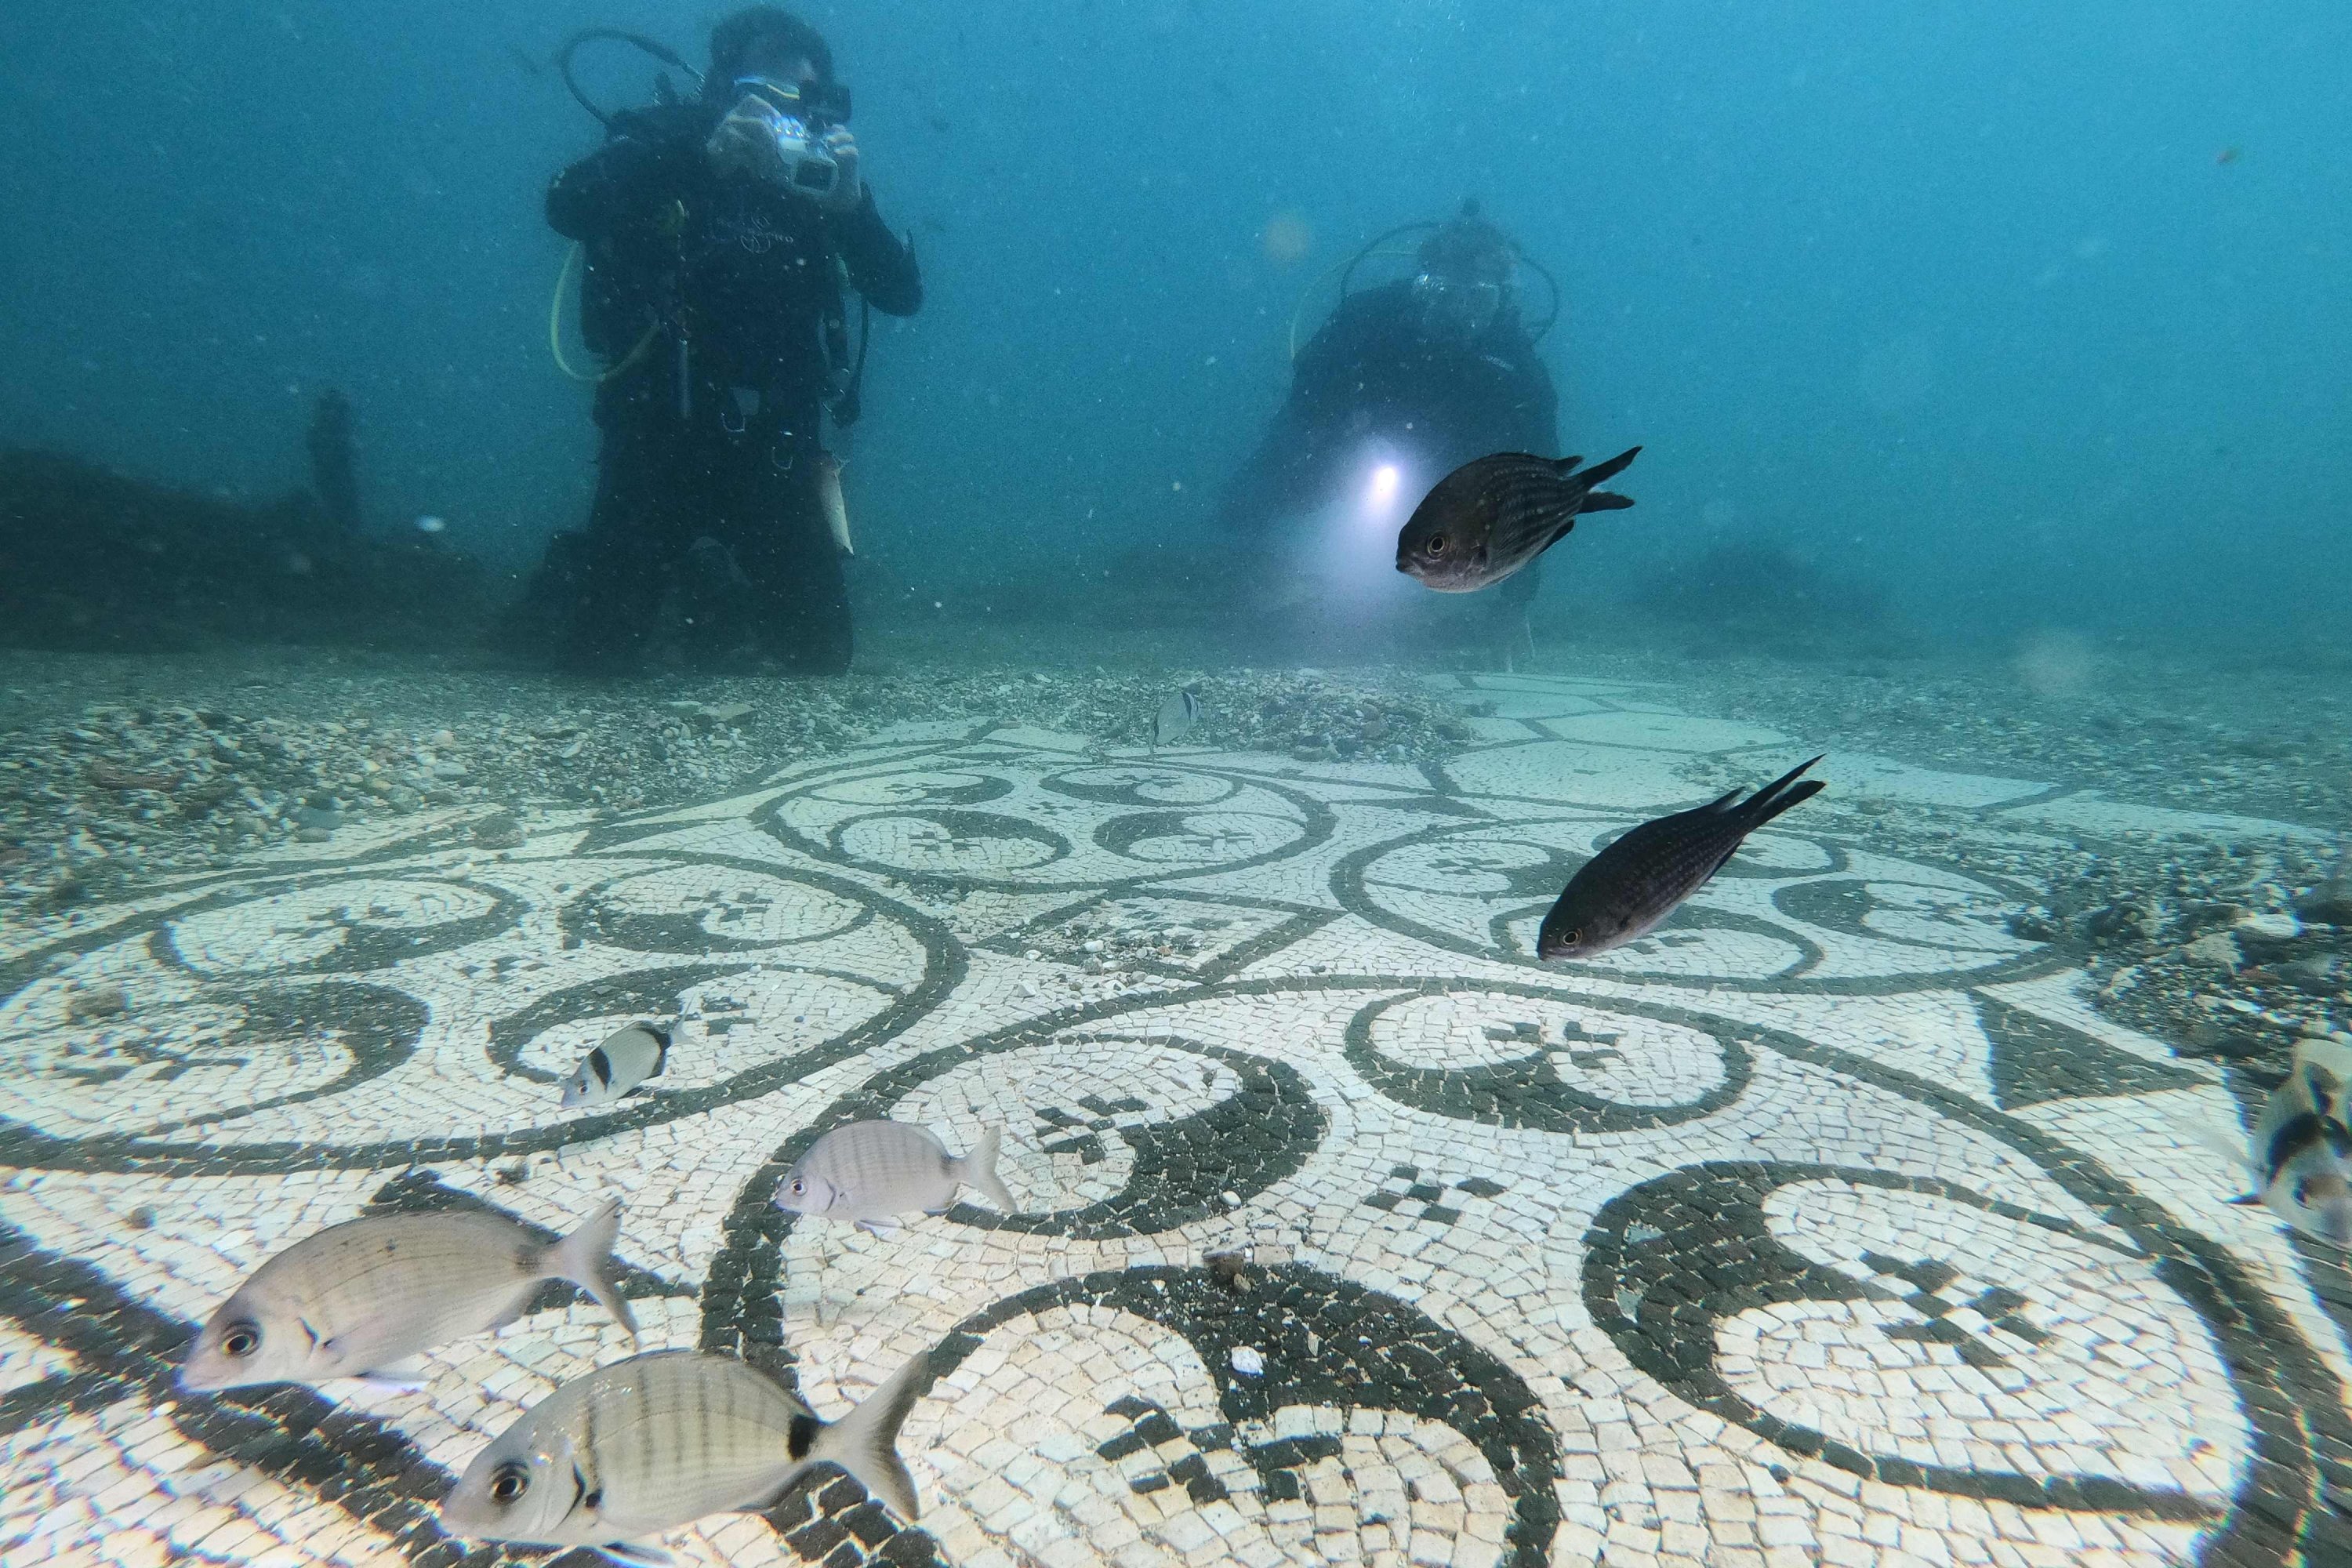 A dive guide shows tourists a mosaic from Villa a Protiro, in the submerged ancient Roman city of Baiae, Pozzuoli near Naples, Italy, Aug. 18, 2021. (AFP Photo)